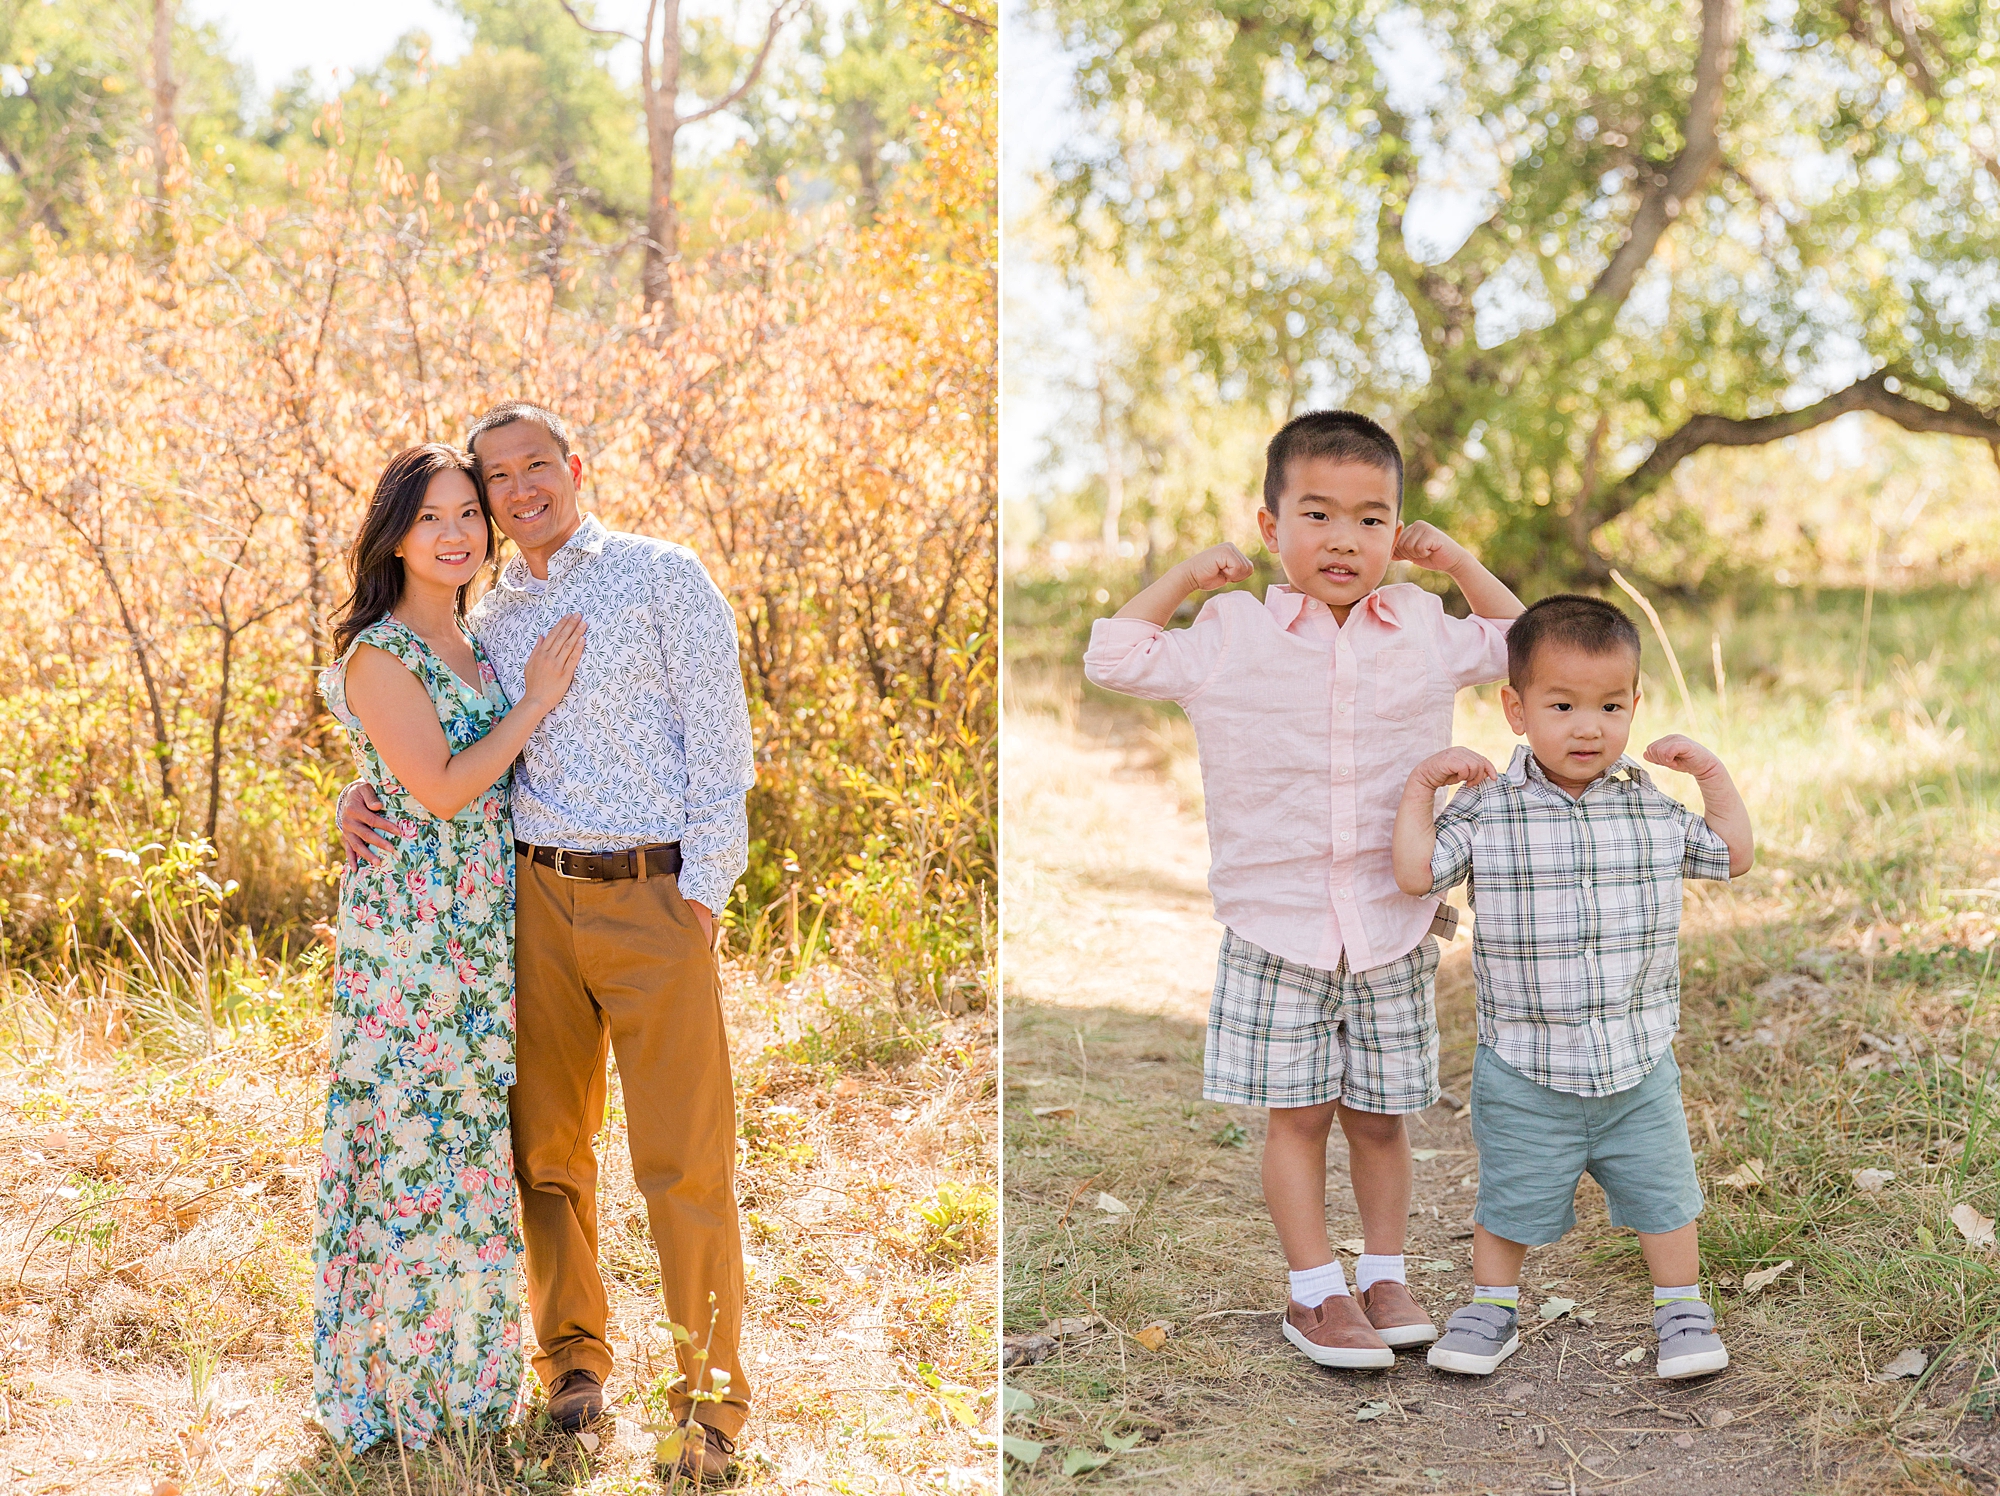 Northern Colorado Top 10 Locations for Family Photo Sessions at South boulder creek Trailhead